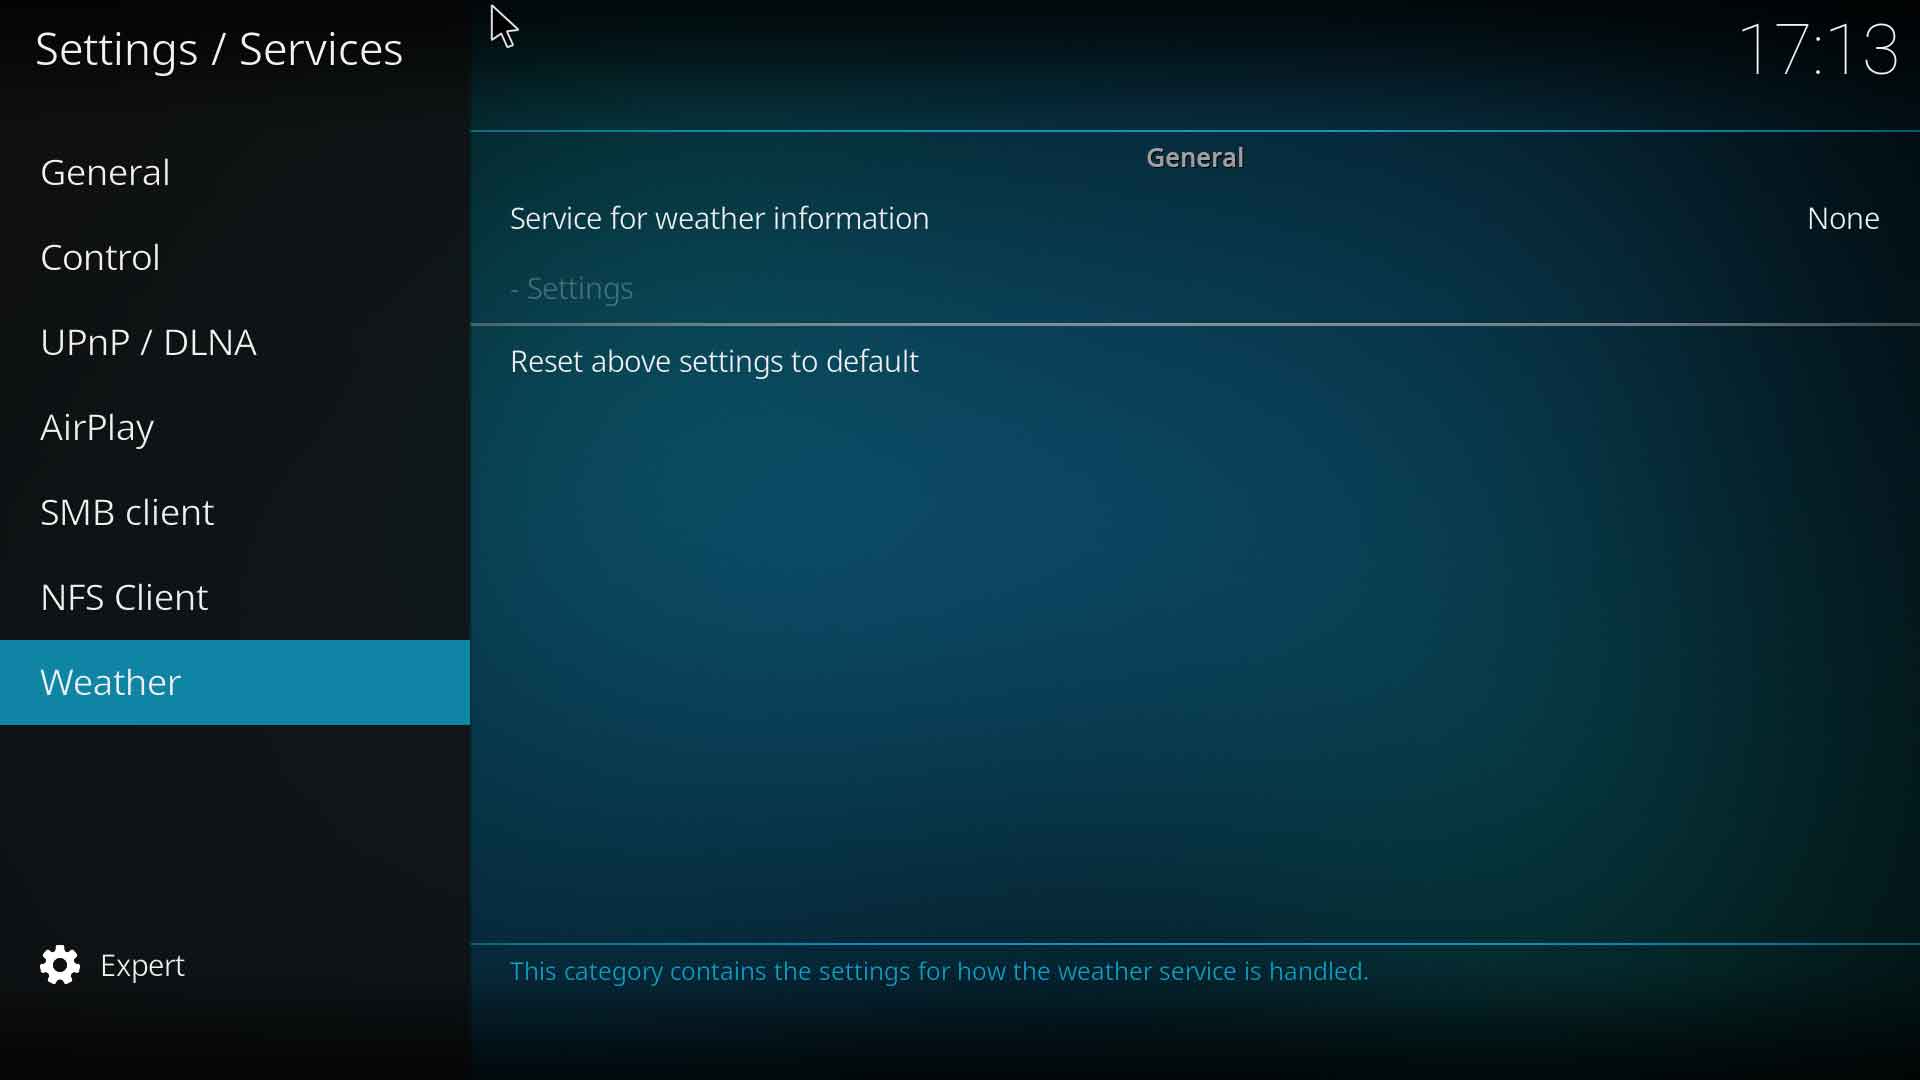 Step 1: Access the Weather Settings page as shown in the image. Select Service for weather information